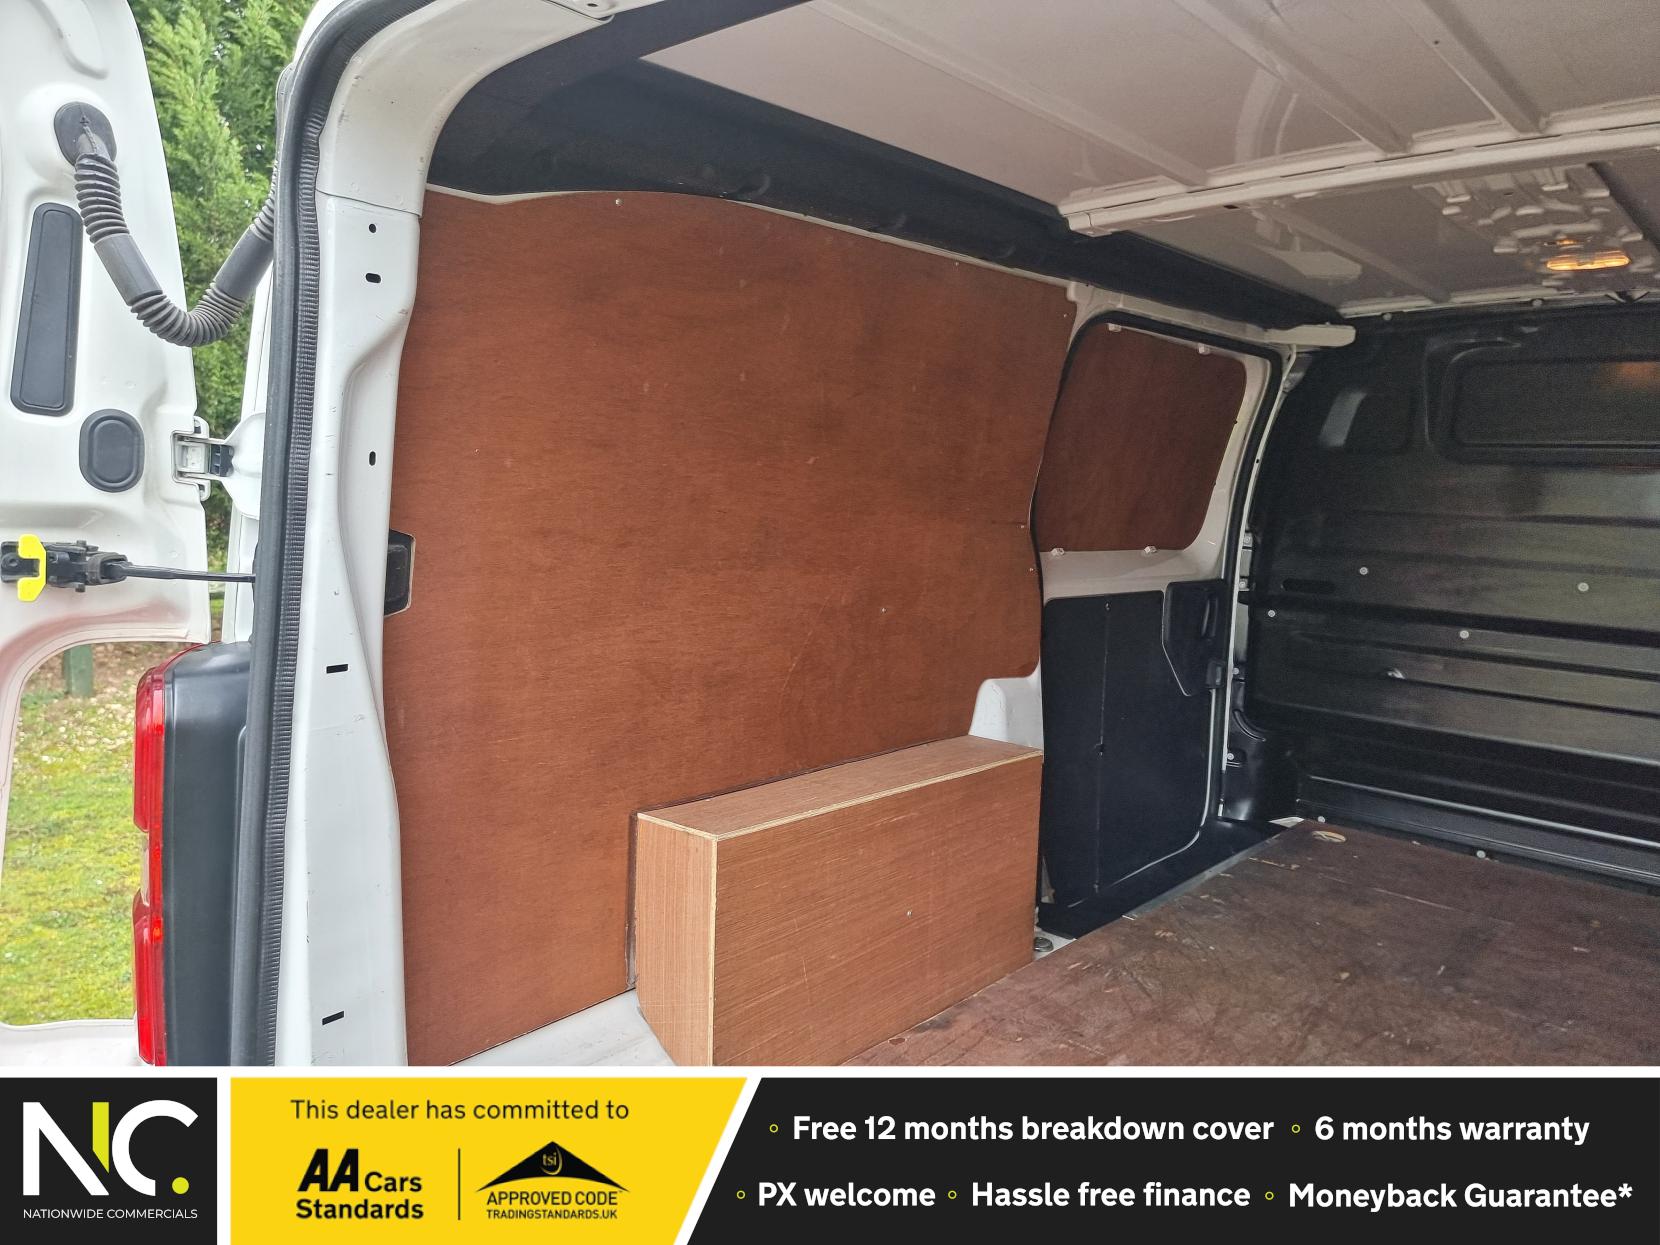 Vauxhall Vivaro 1.5 Turbo L2 H1 Dynamic Panel Van - (100 ps) 2900 Diesel Manual ⭐️ Twin Side Loaders ⭐️ Park Assist ⭐️ Euro 6 ⭐️  One Owner ⭐️  Finance Available